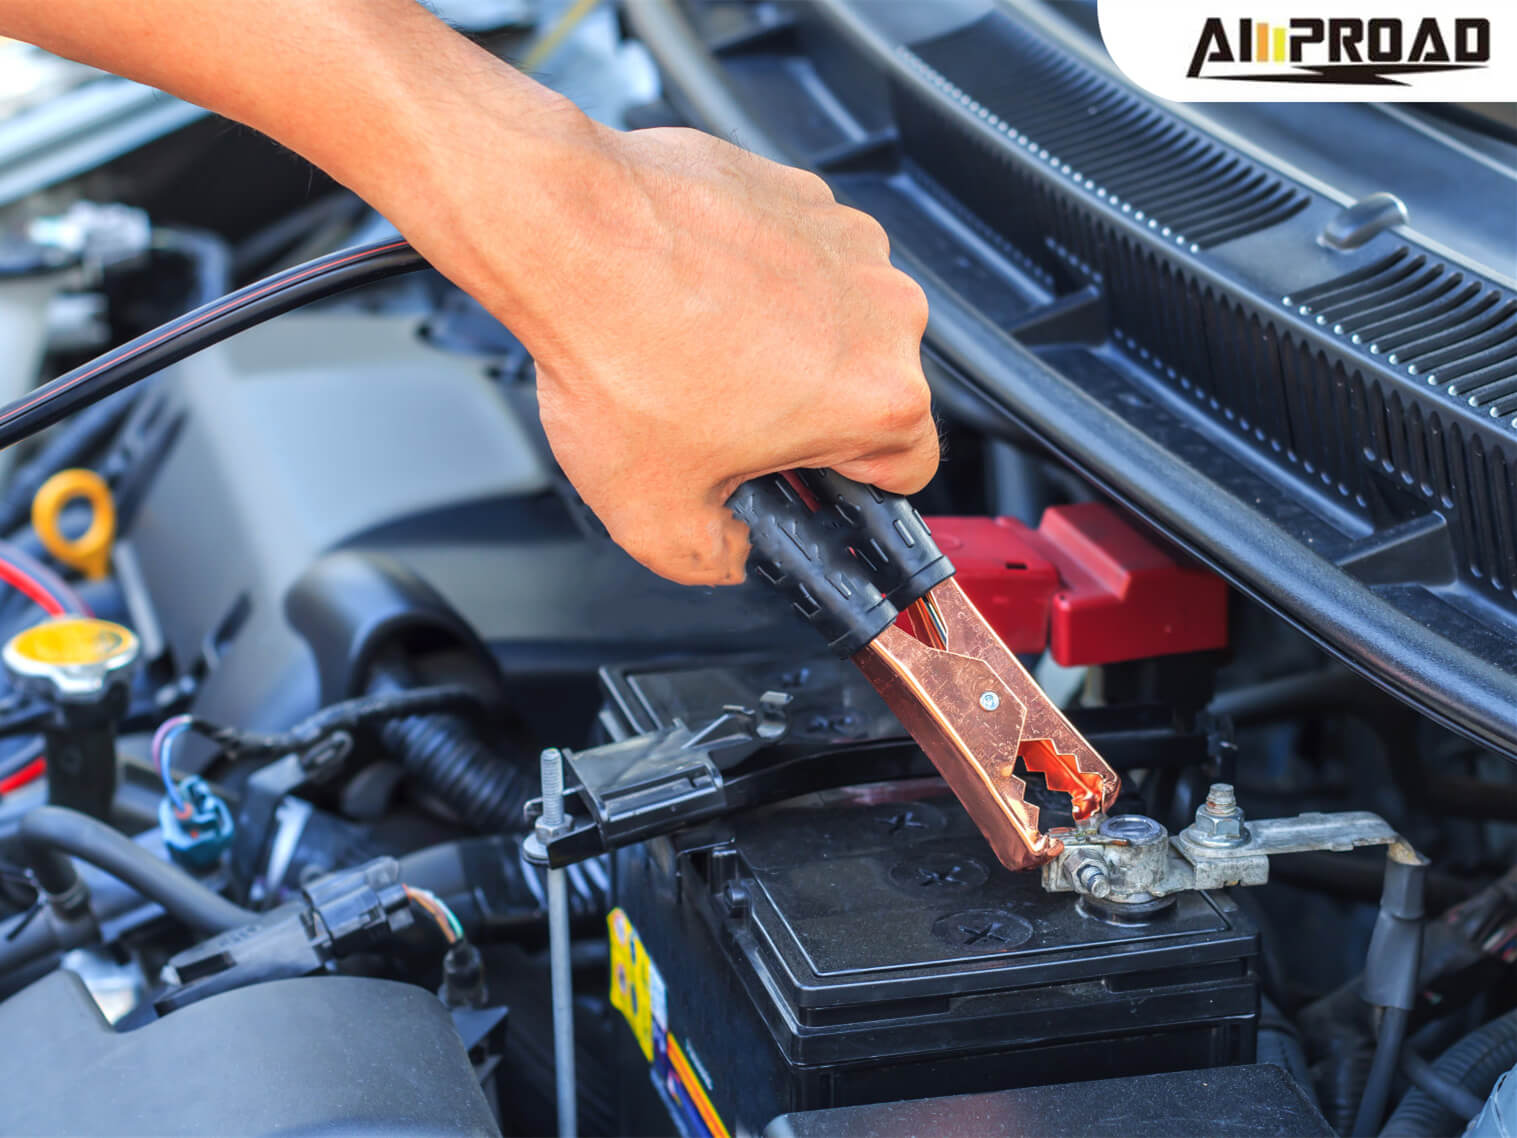 What Is the Best Small Portable Car Battery Jump Start Unit? Is It Best to Purchase One with USB Ports?